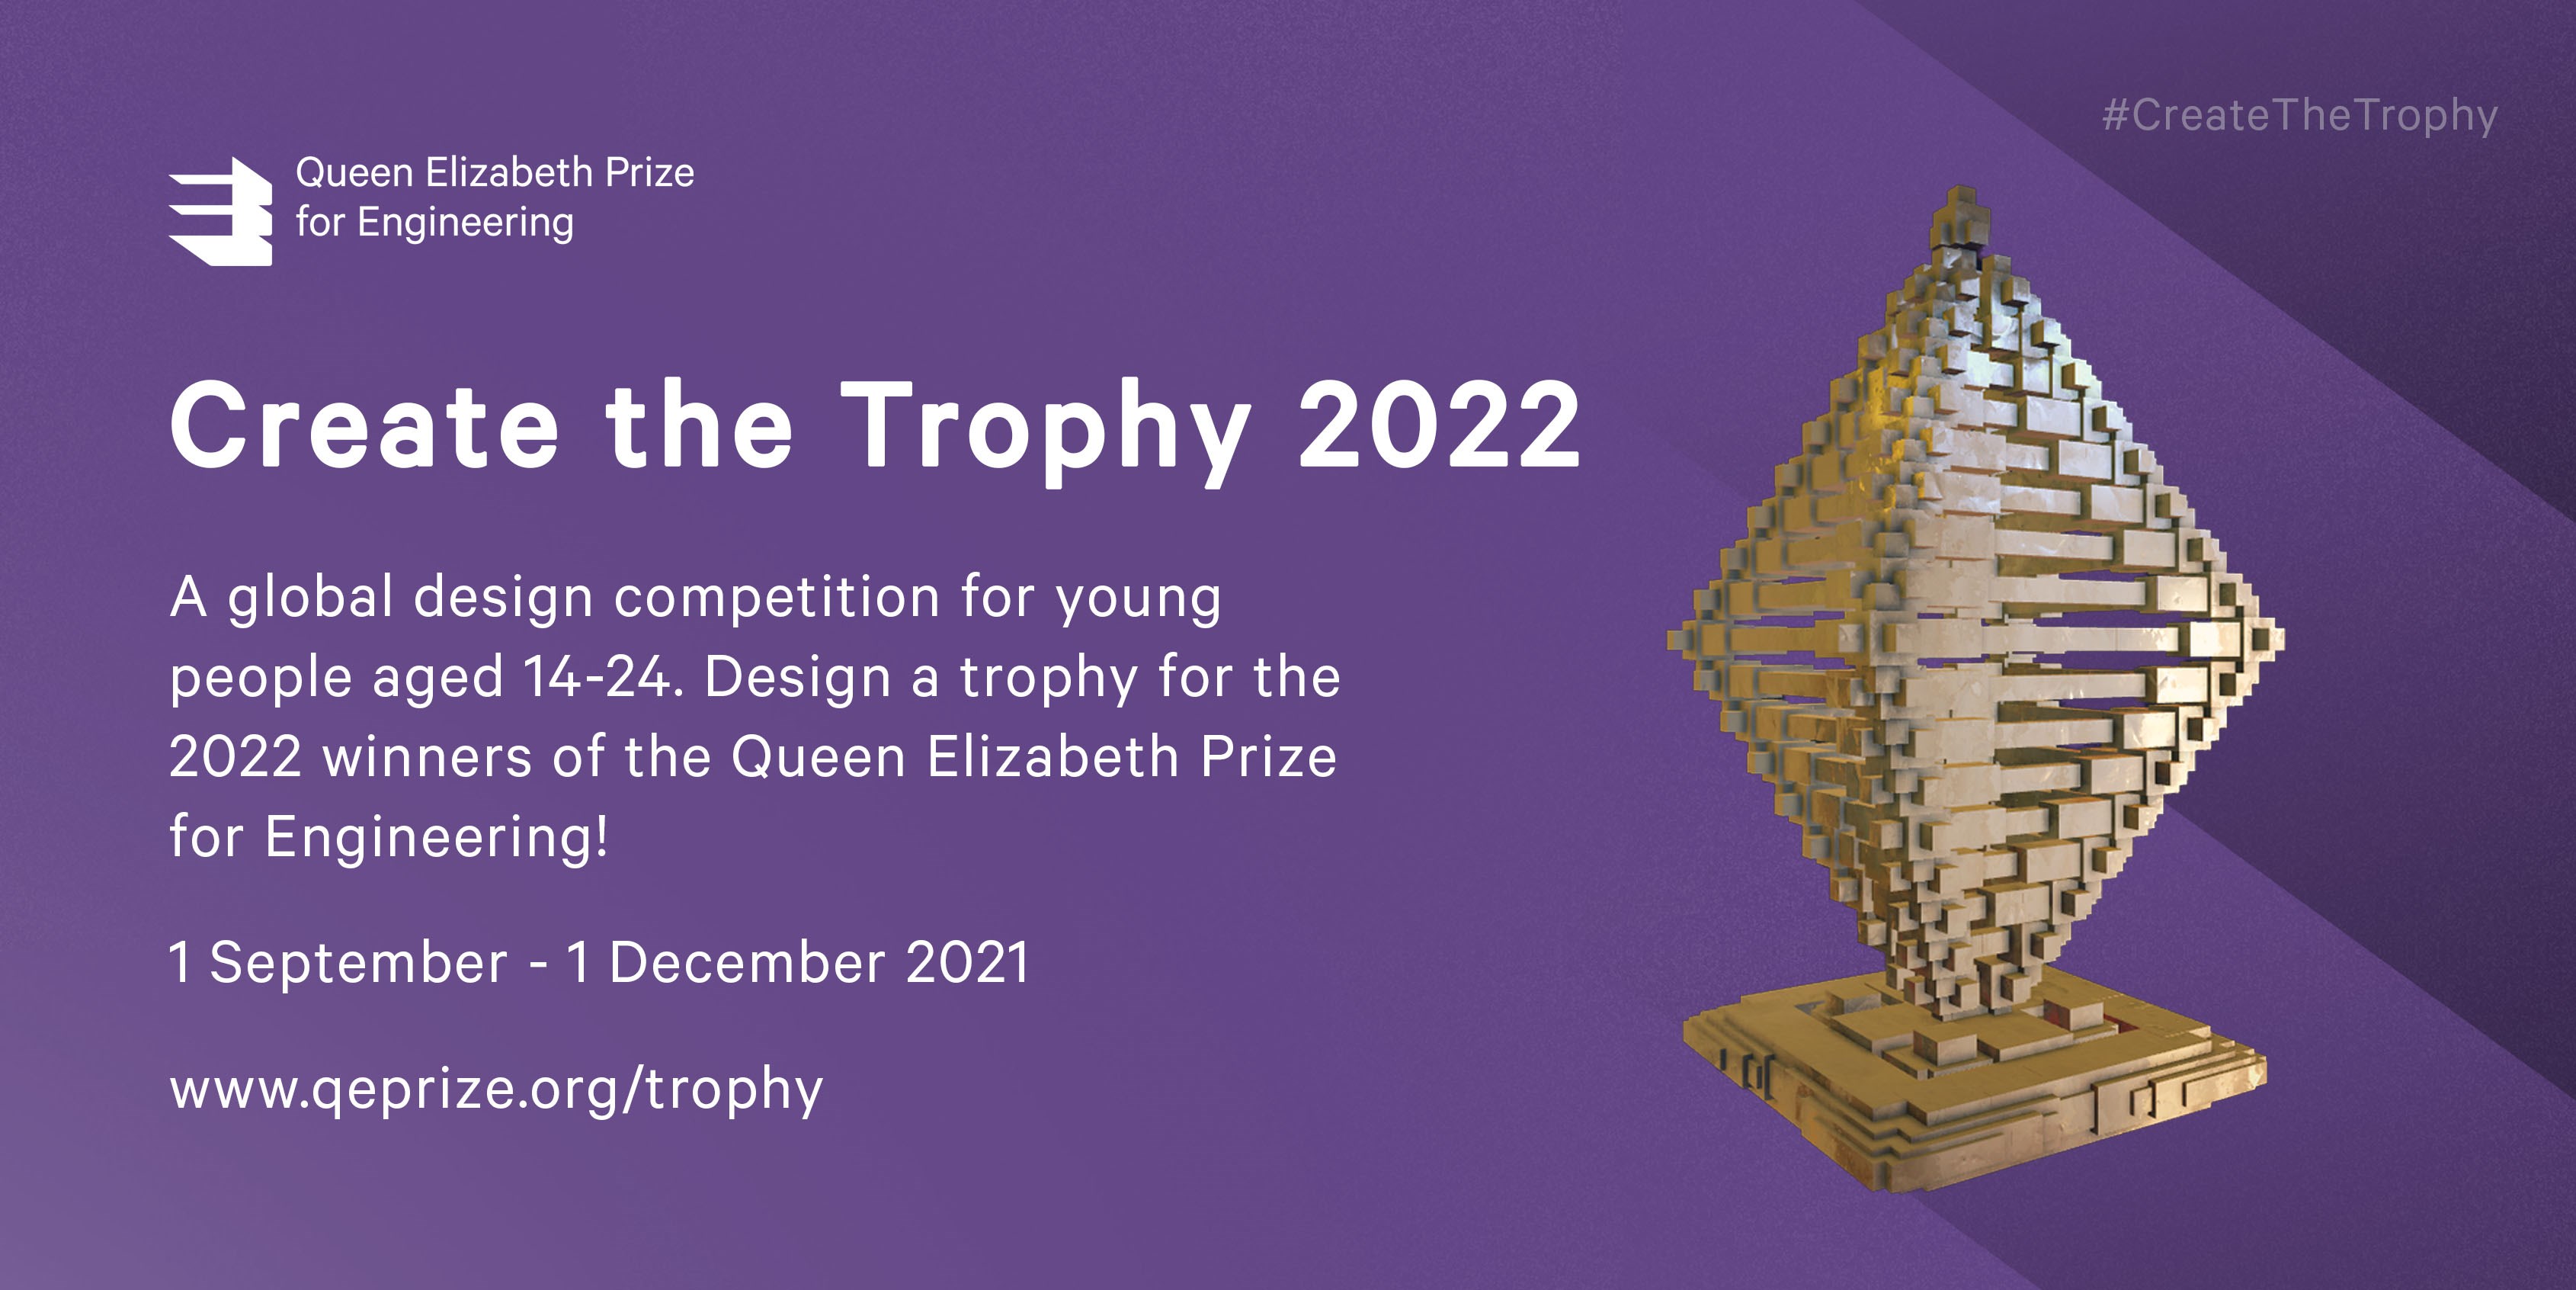 Create the Trophy 2022 - image of last year's trophy and competition details (shown in article)